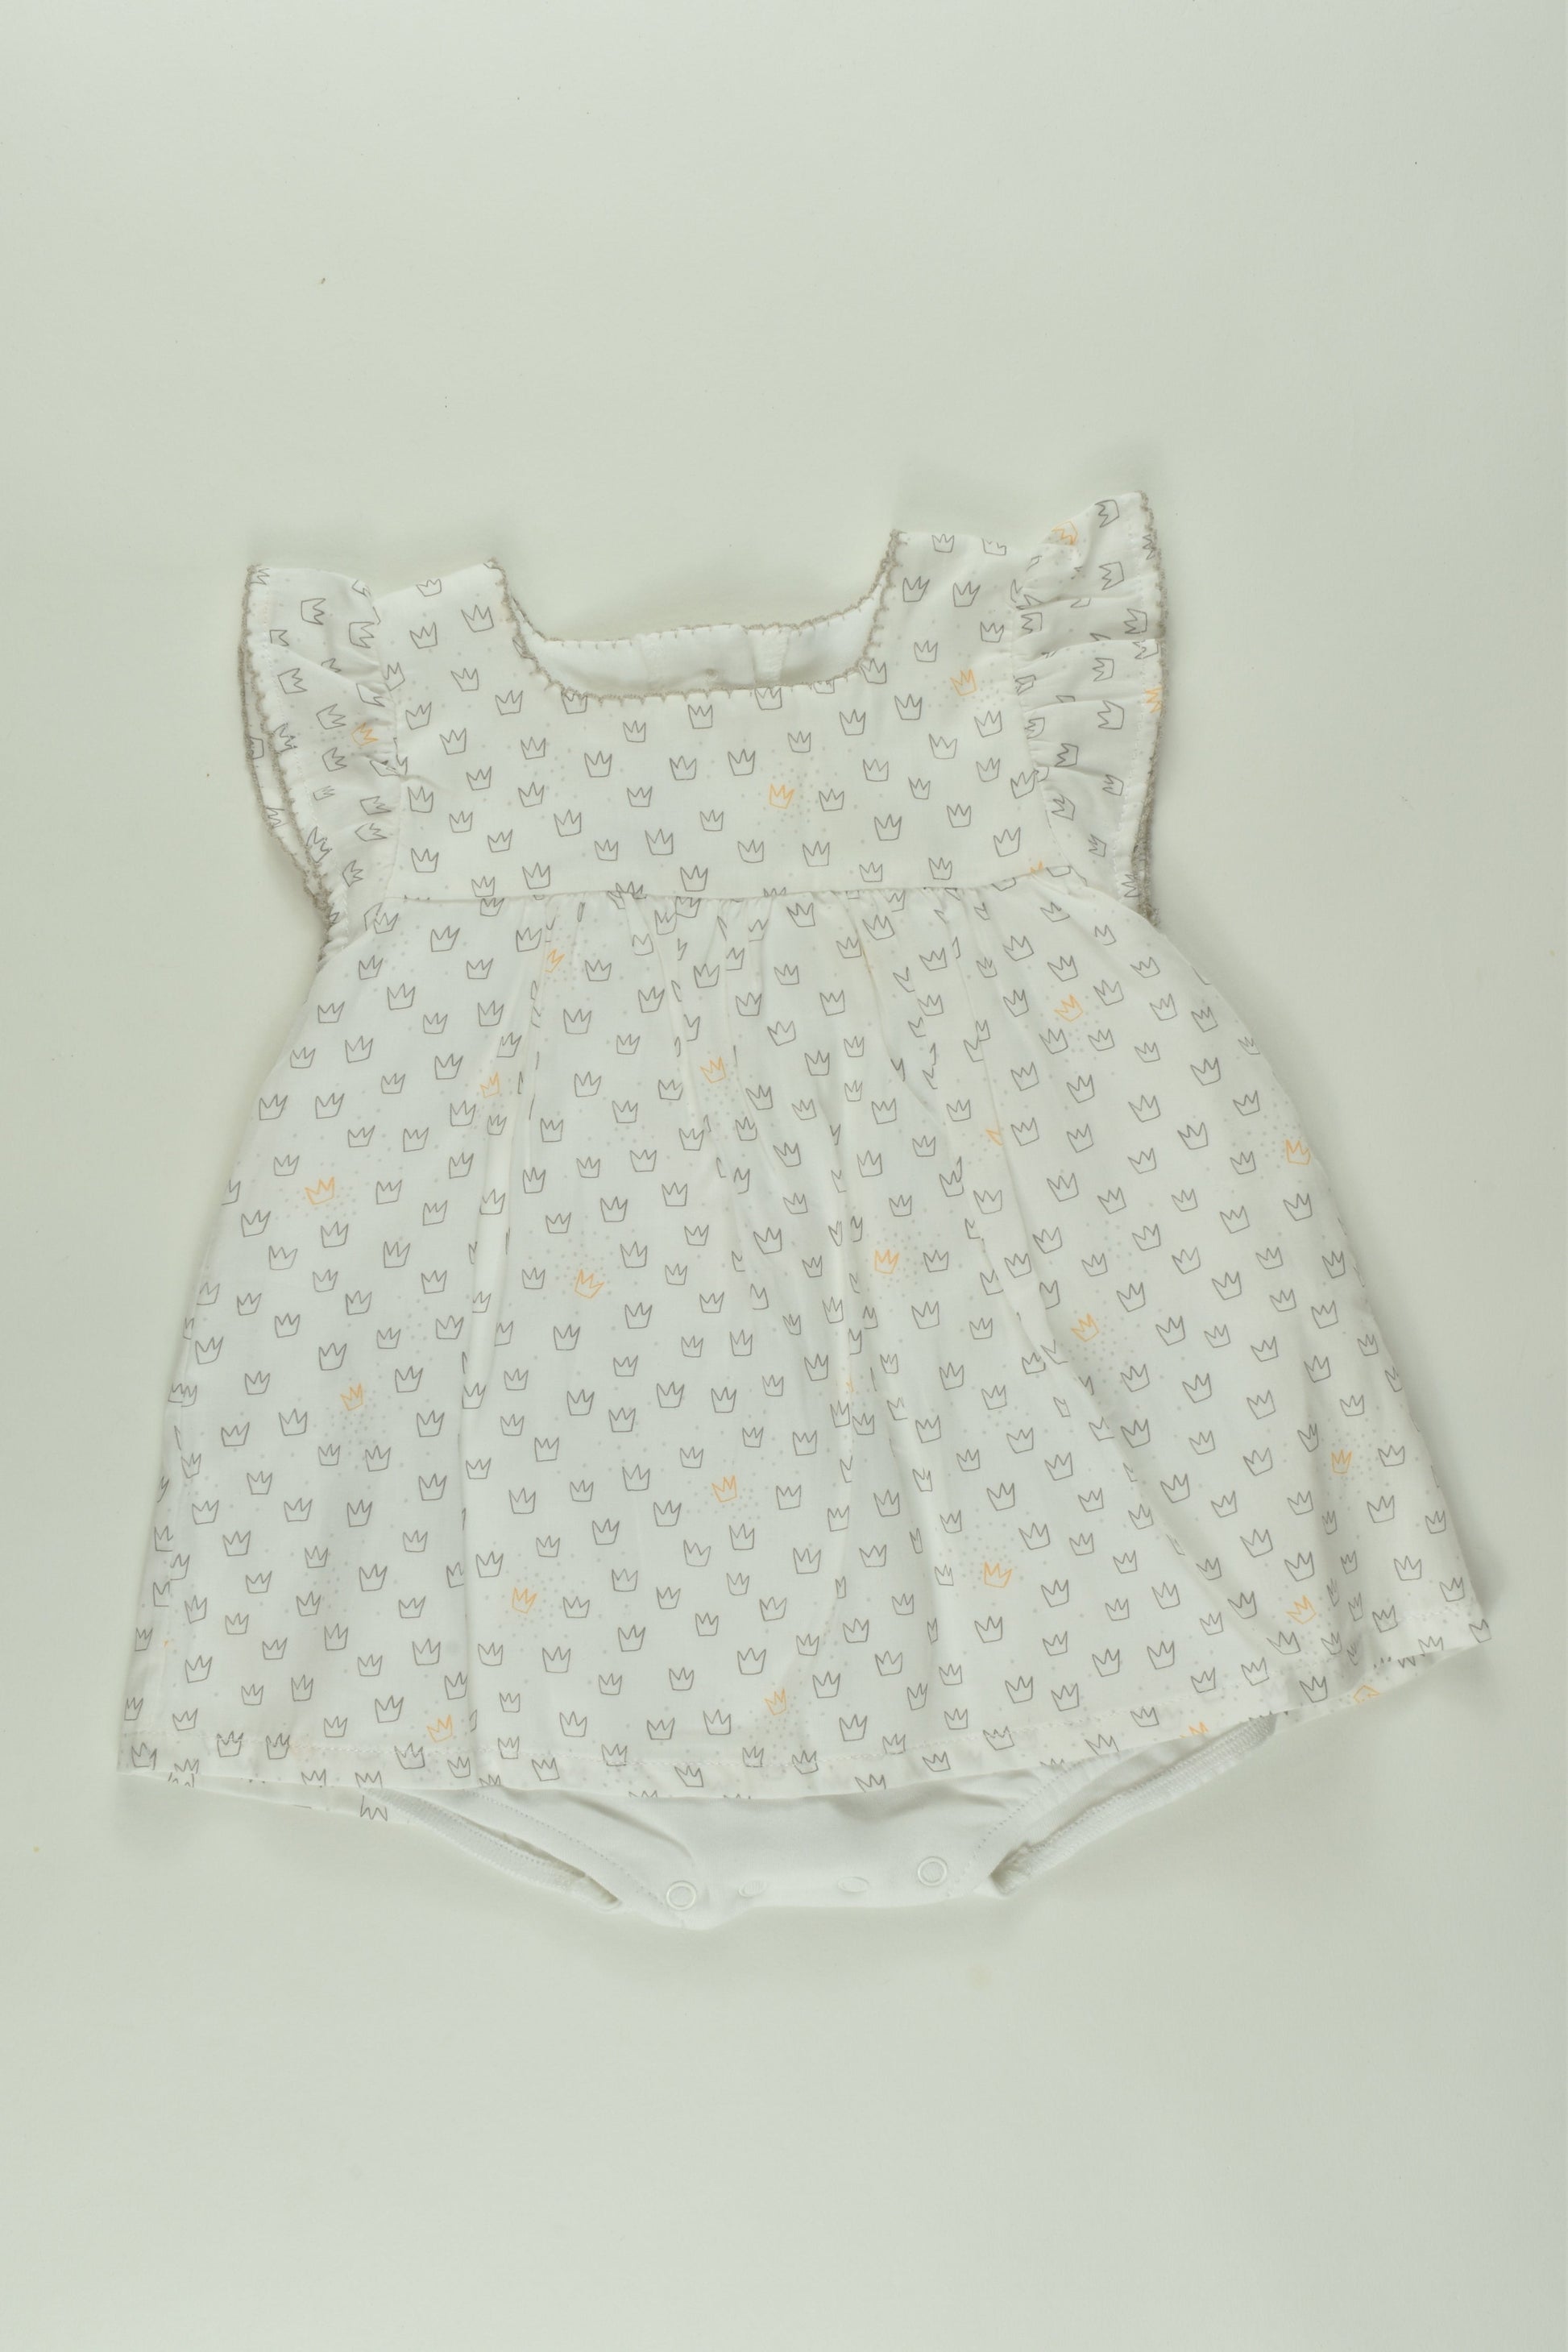 Absorba Size 000 (3m) Outfit